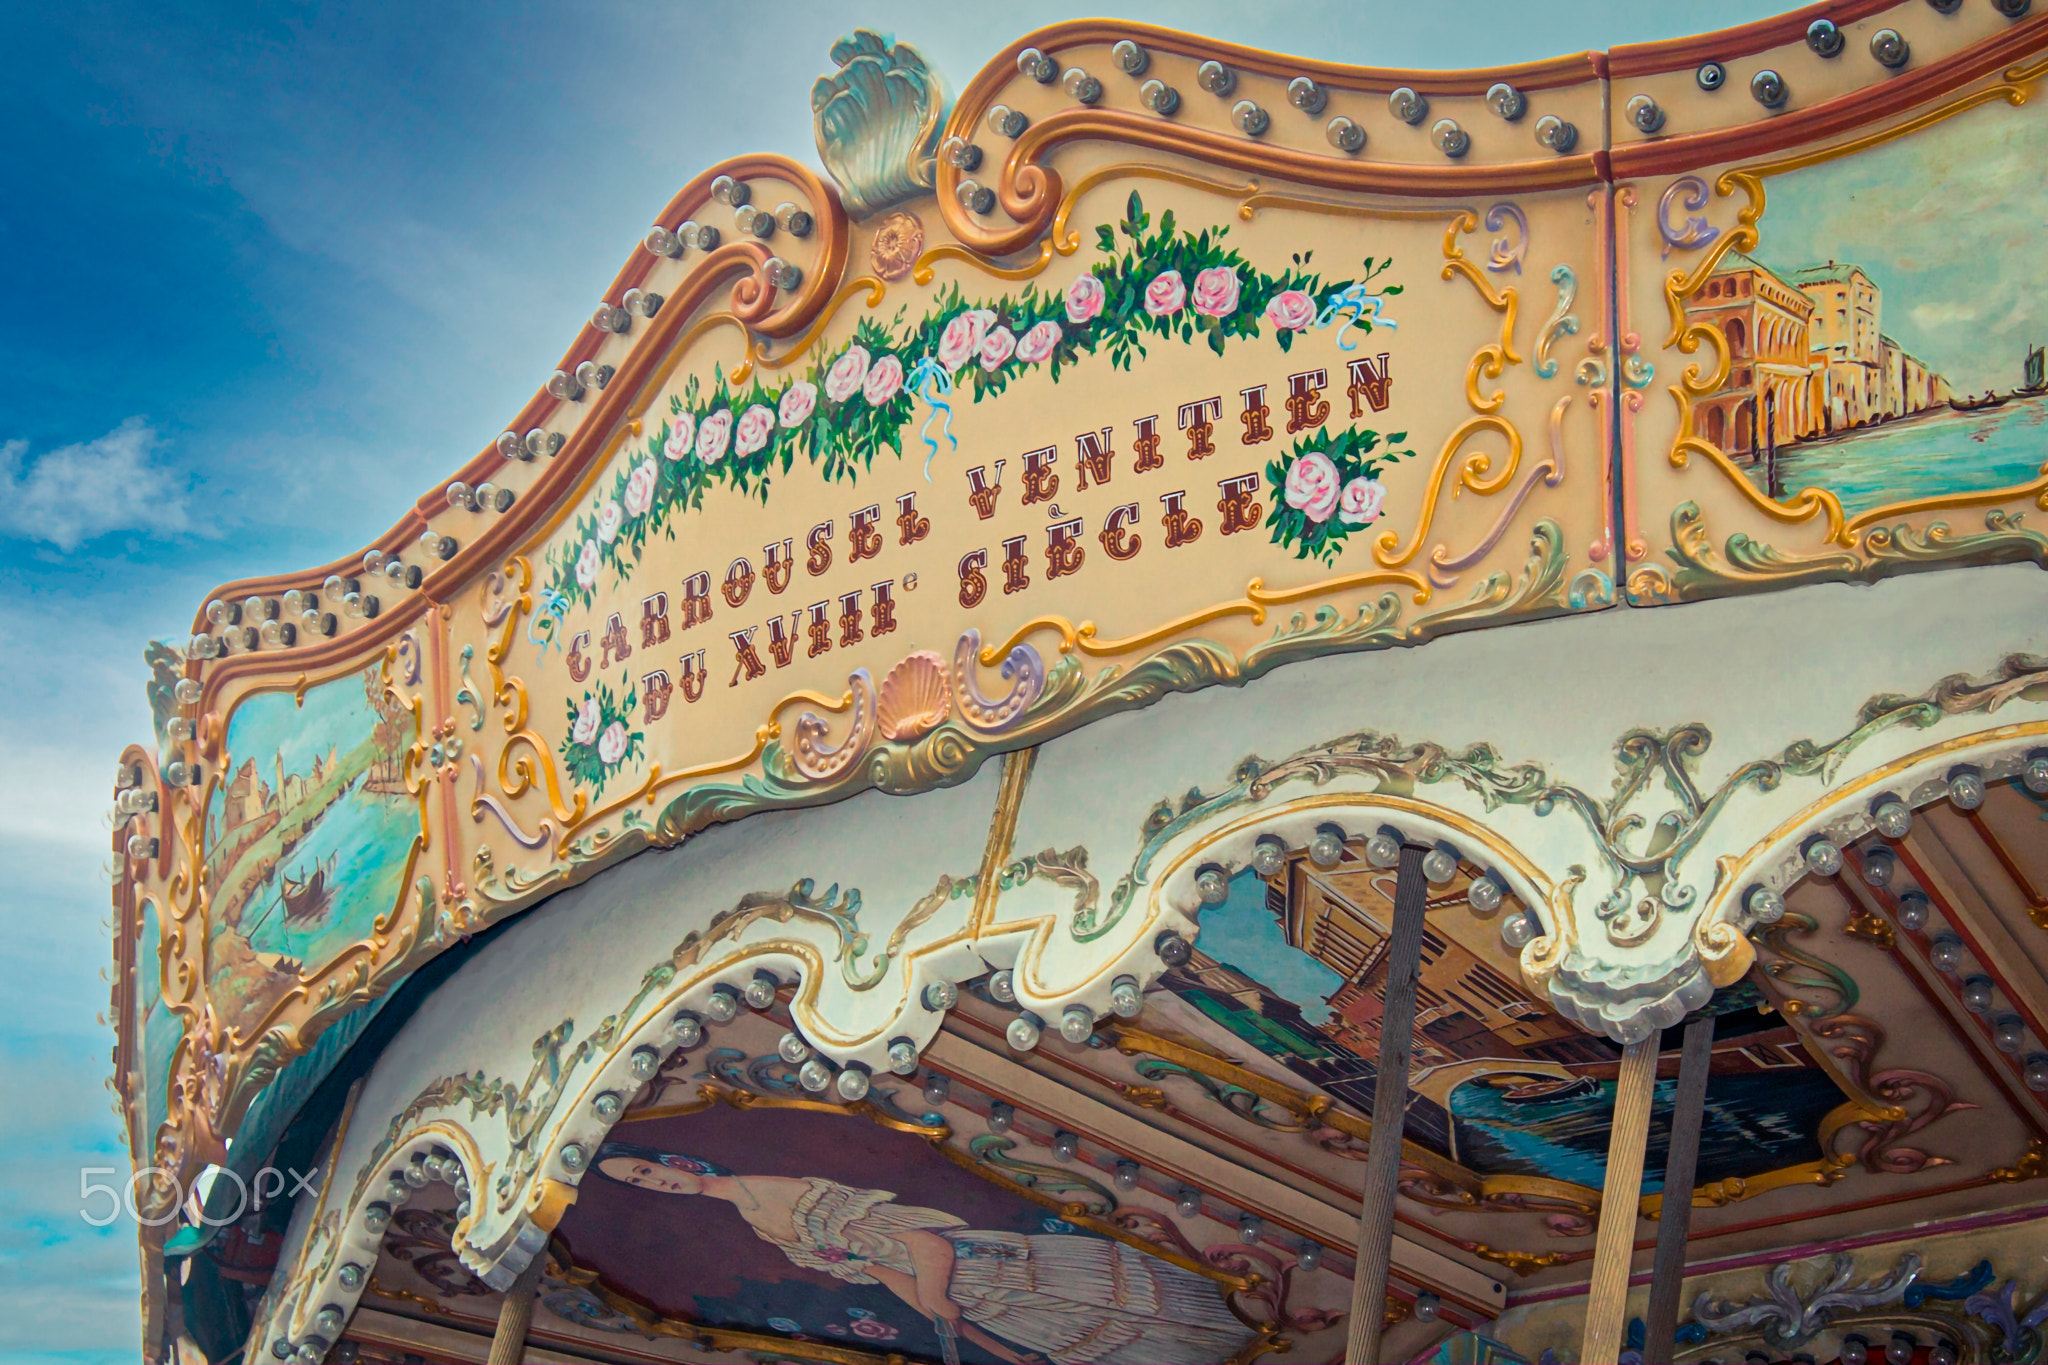 A day at the Carrousel